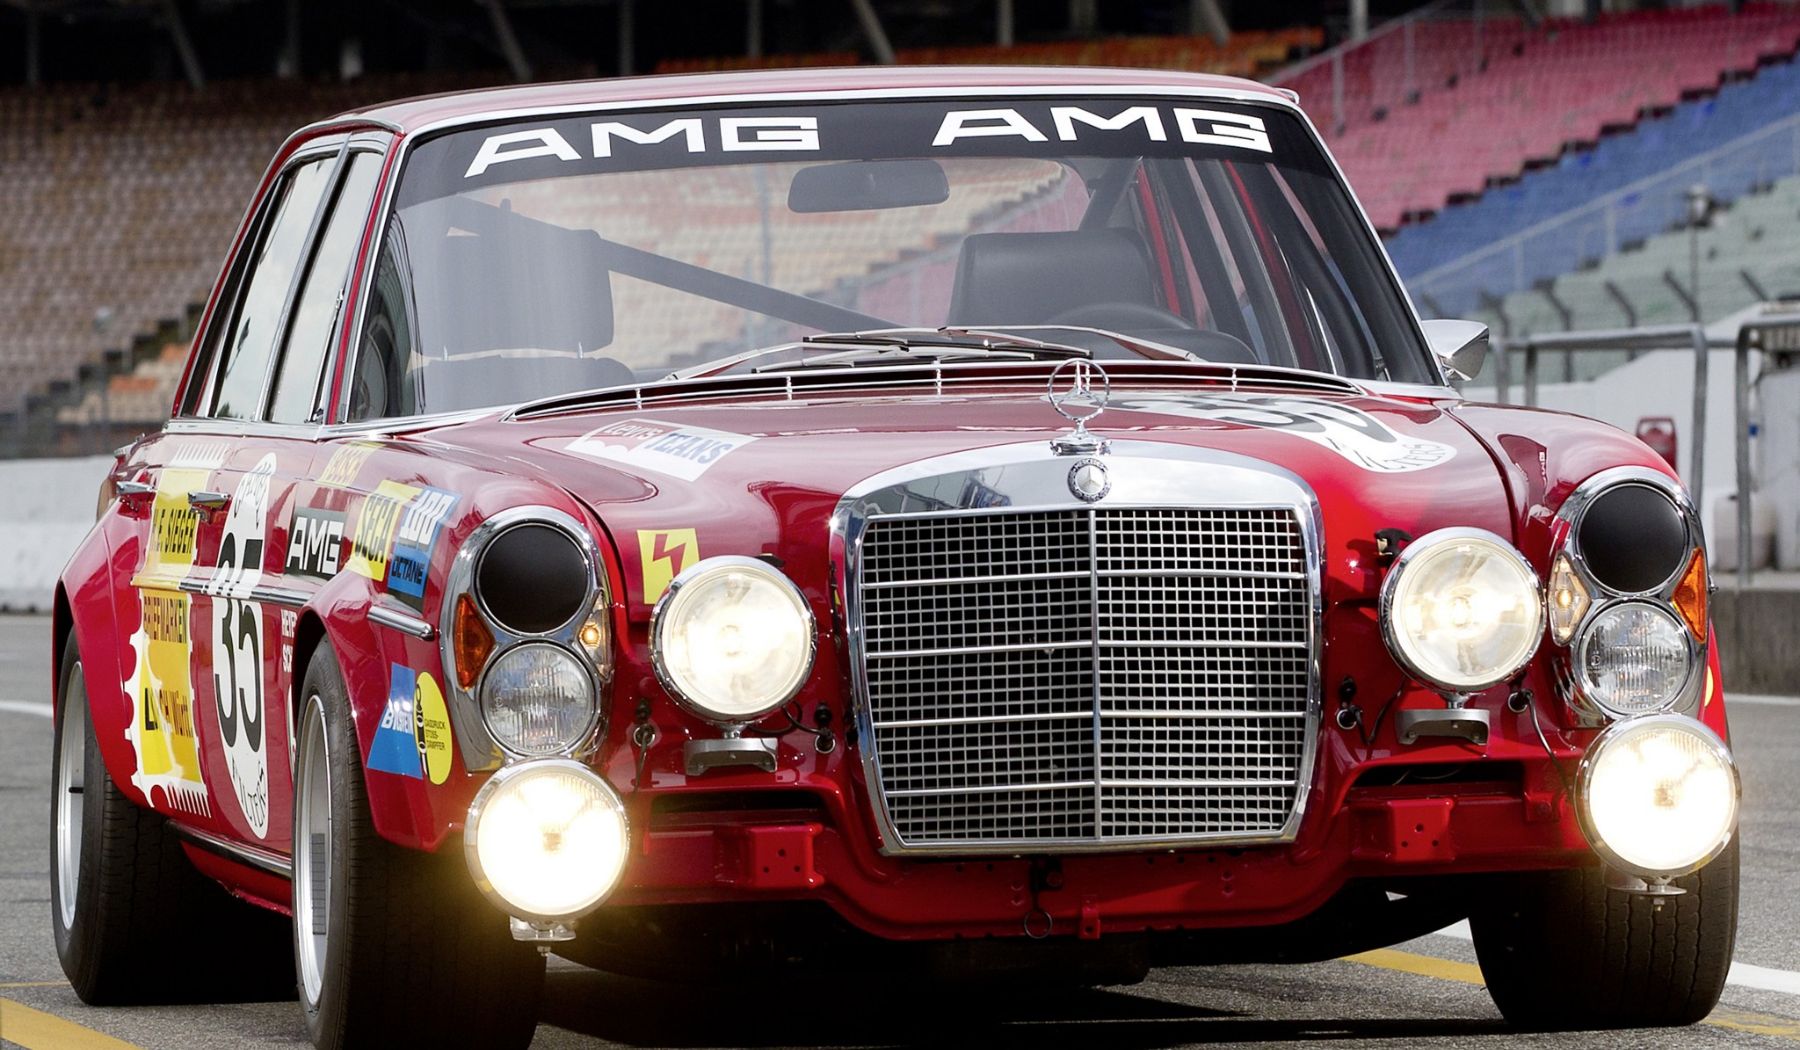 Fifty Years Ago, the Legendary ‘Red Pig’ Introduced AMG to the